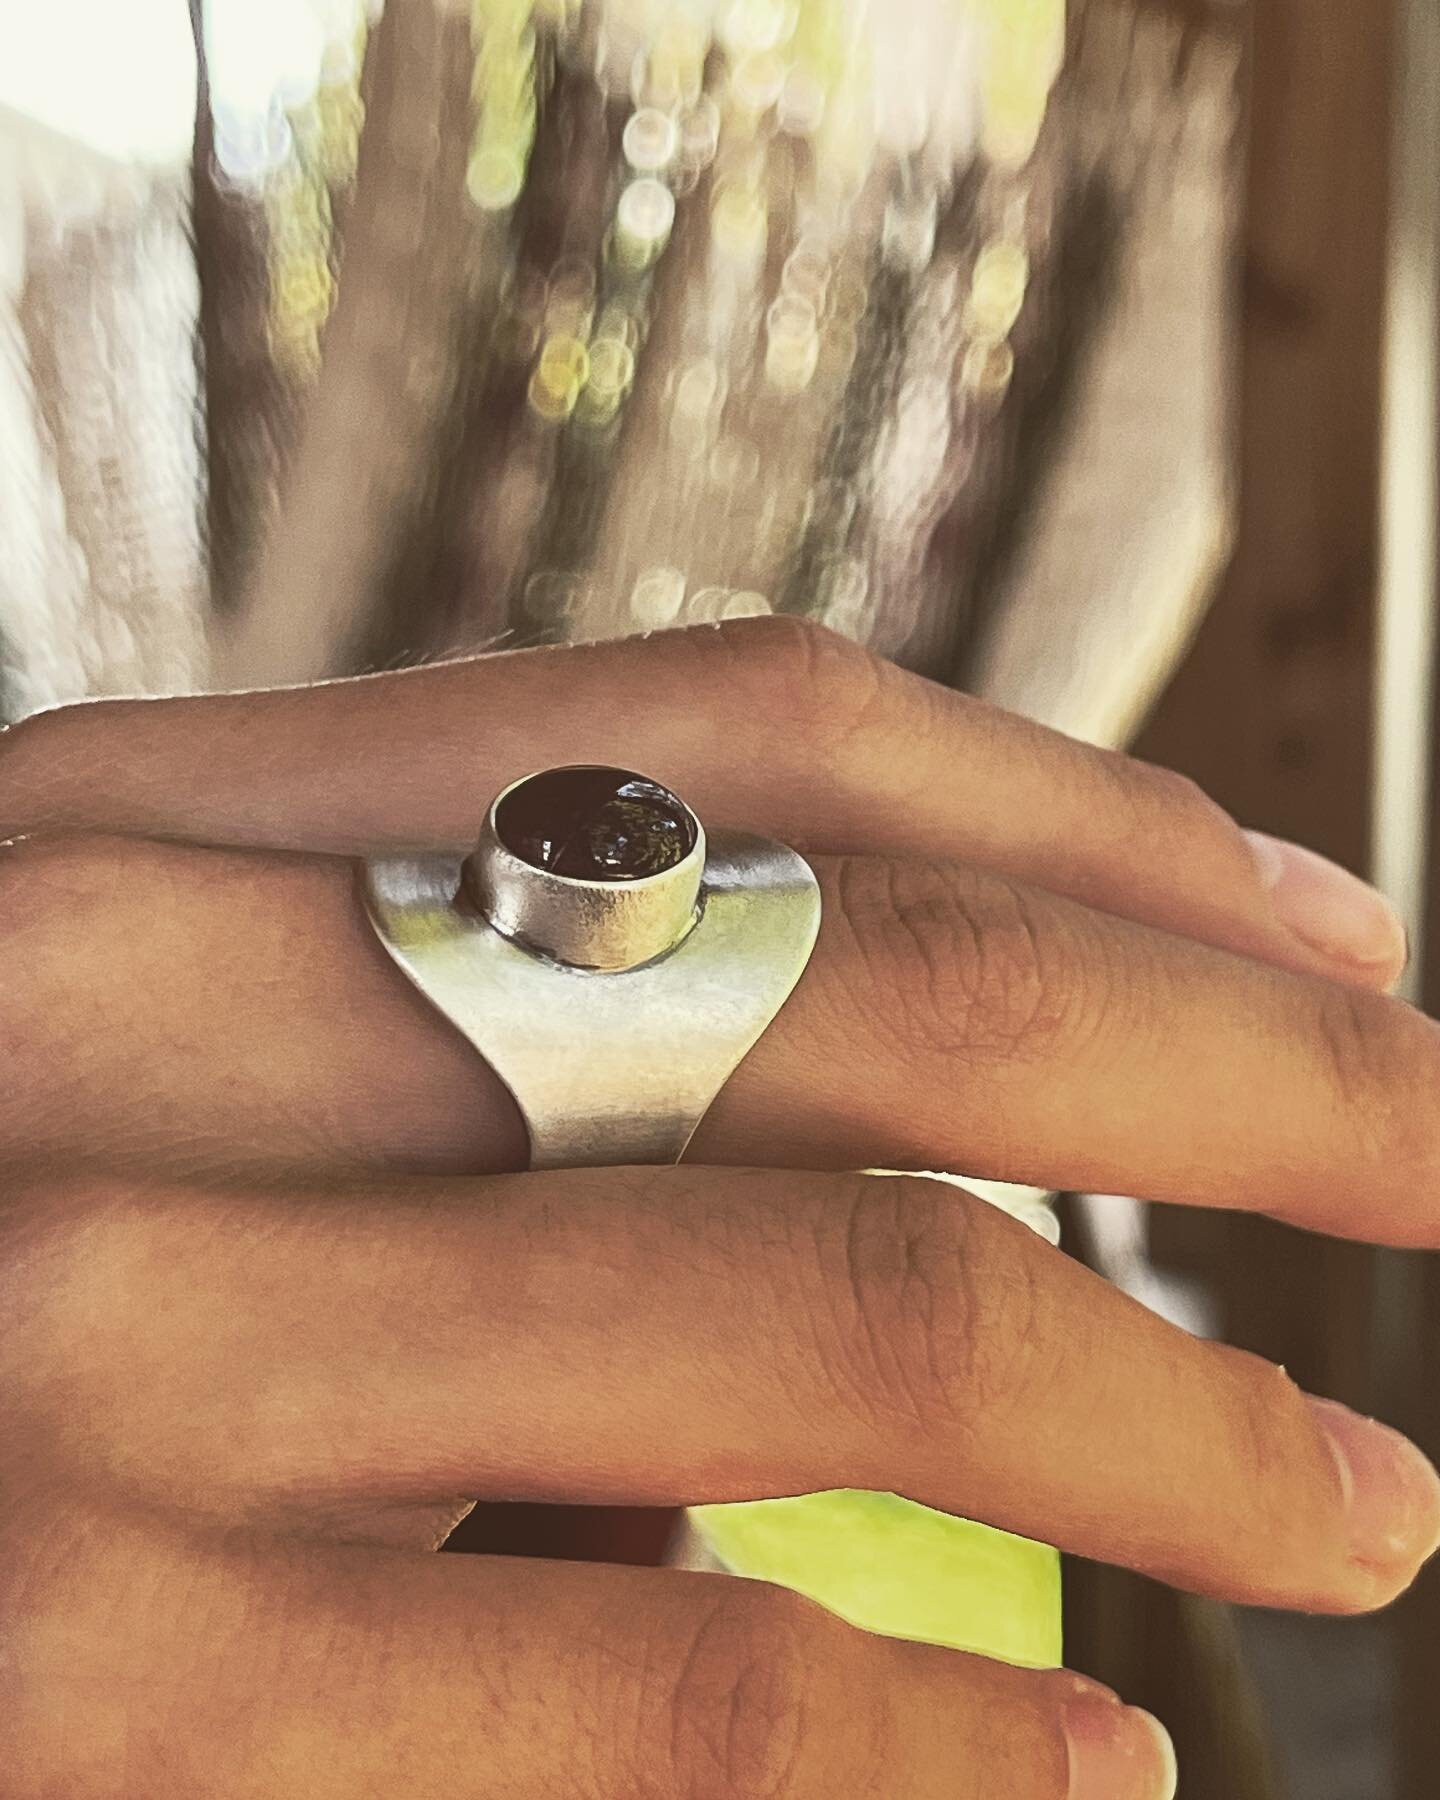 Saddle rings are so comfortable to wear and tend to be the go-to-casual ring for those comfort days where you want something on your bare finger that fits like a glove.#saddleringsunday #saddlerings #jeanetteblixrings #casualjewelry #comfortjewelry